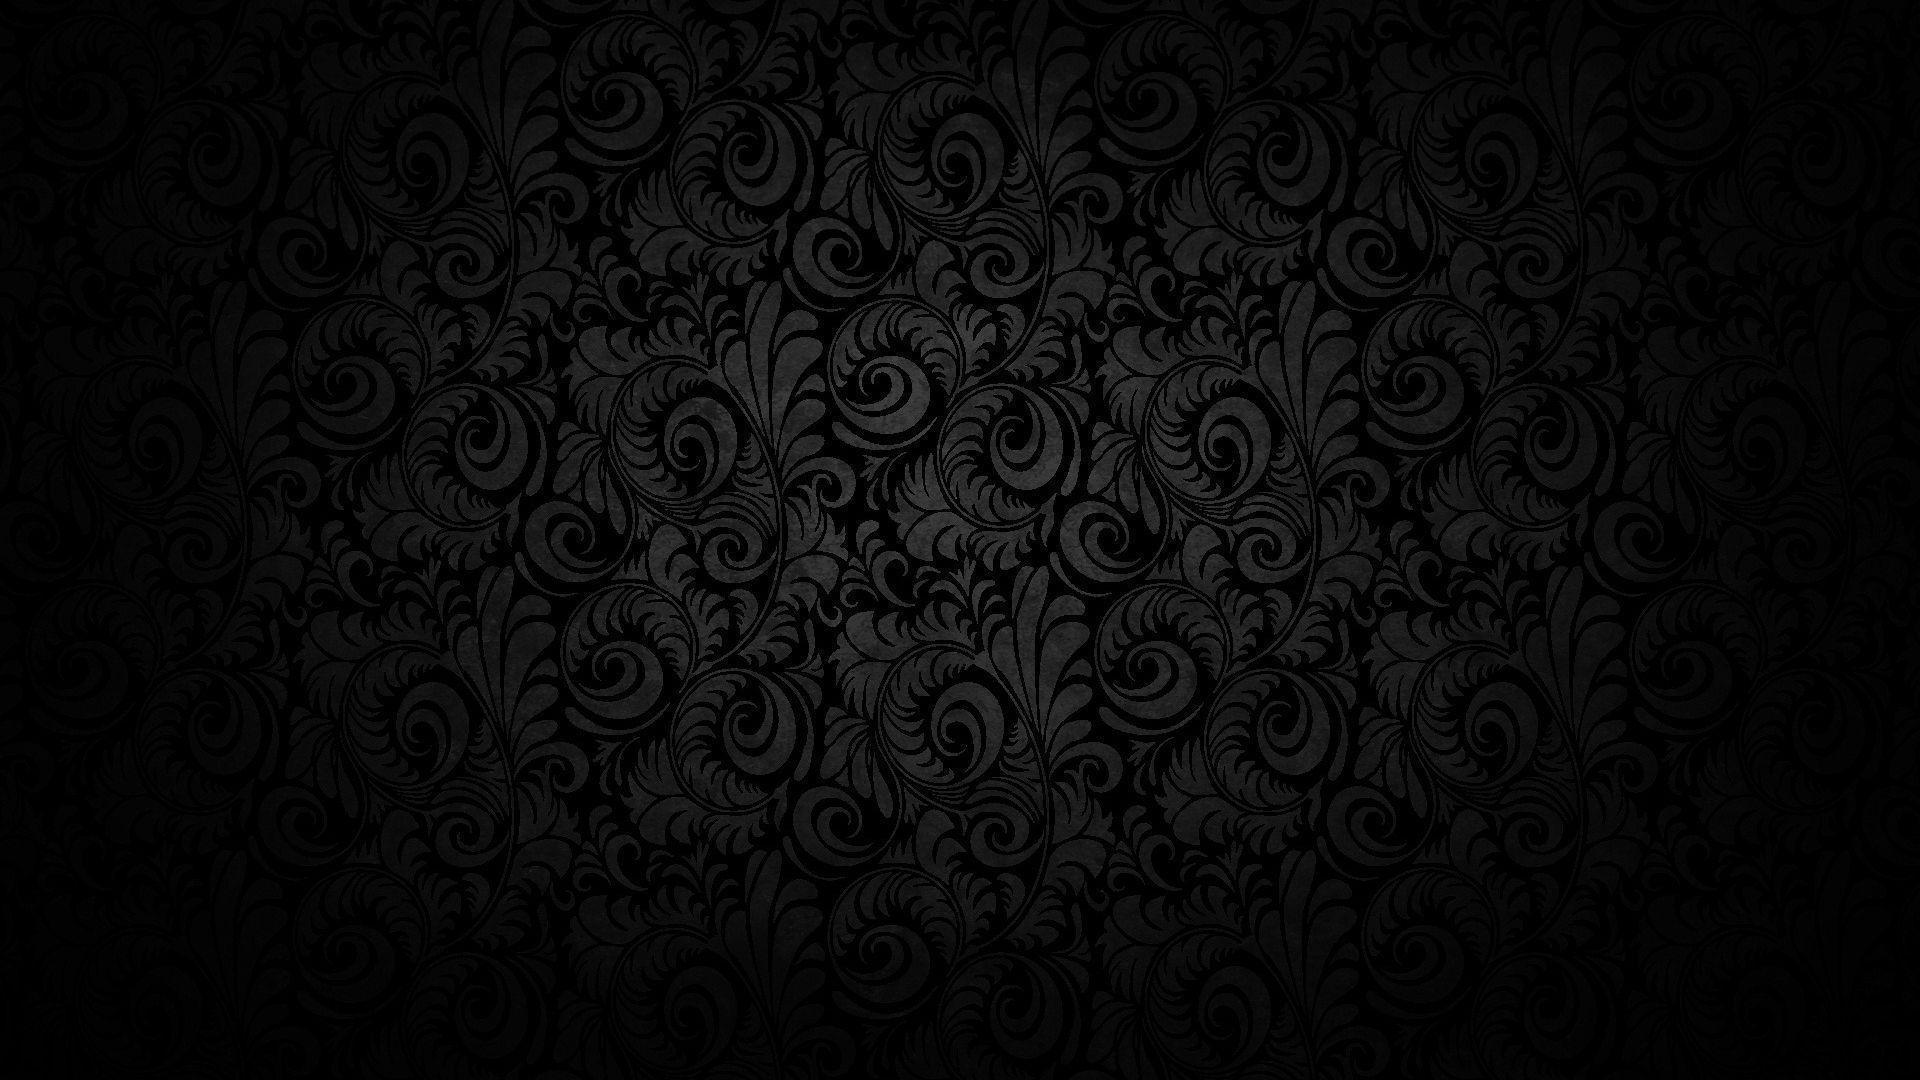 1080p Wallpaper of Abstract Black Swirl Wallpaper Background. HD